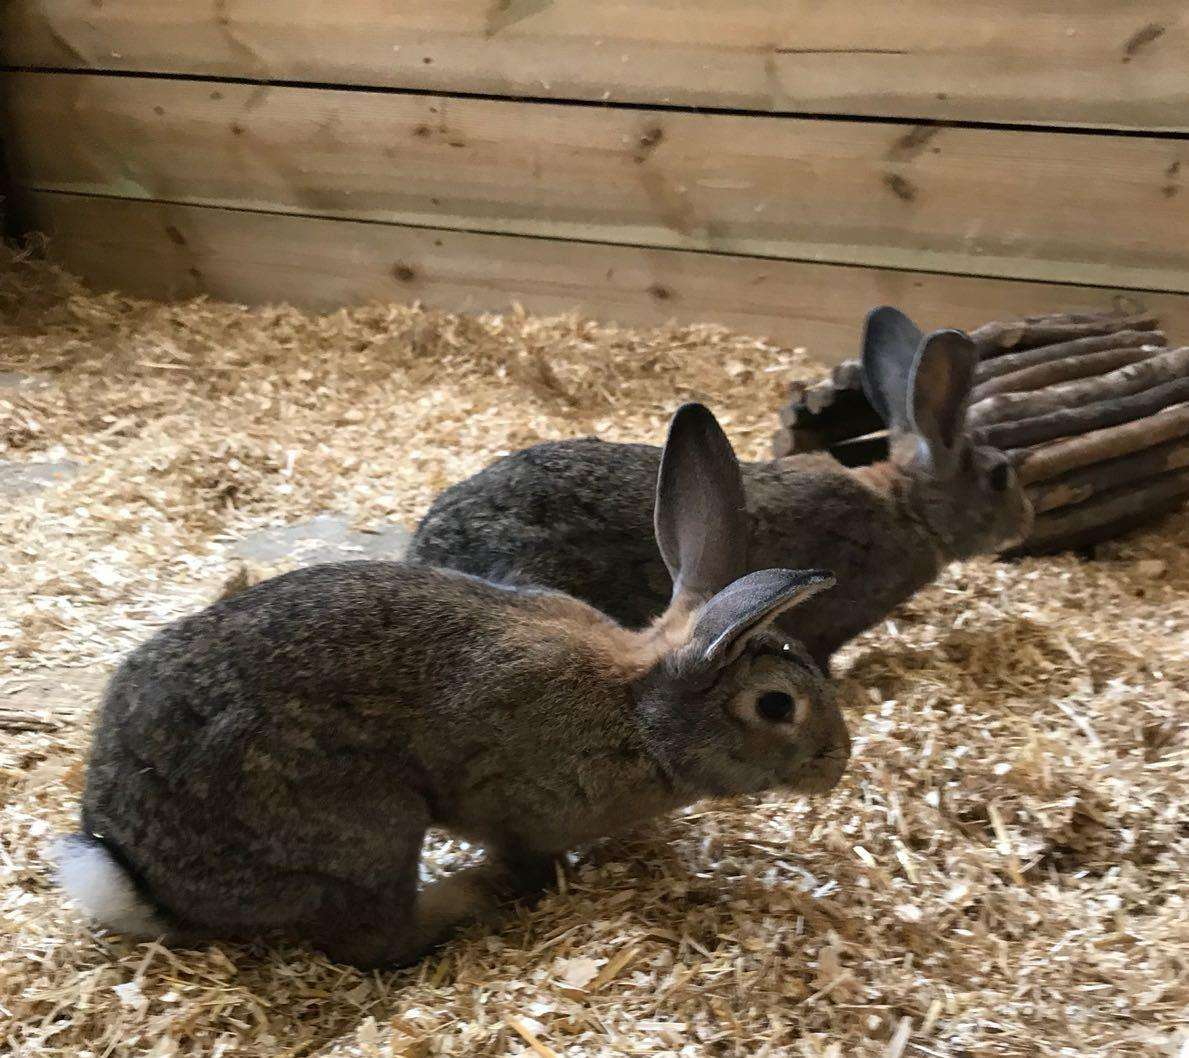 Two rabbits were found dumped in a cardboard box by a parent in Bearsted (2795358)